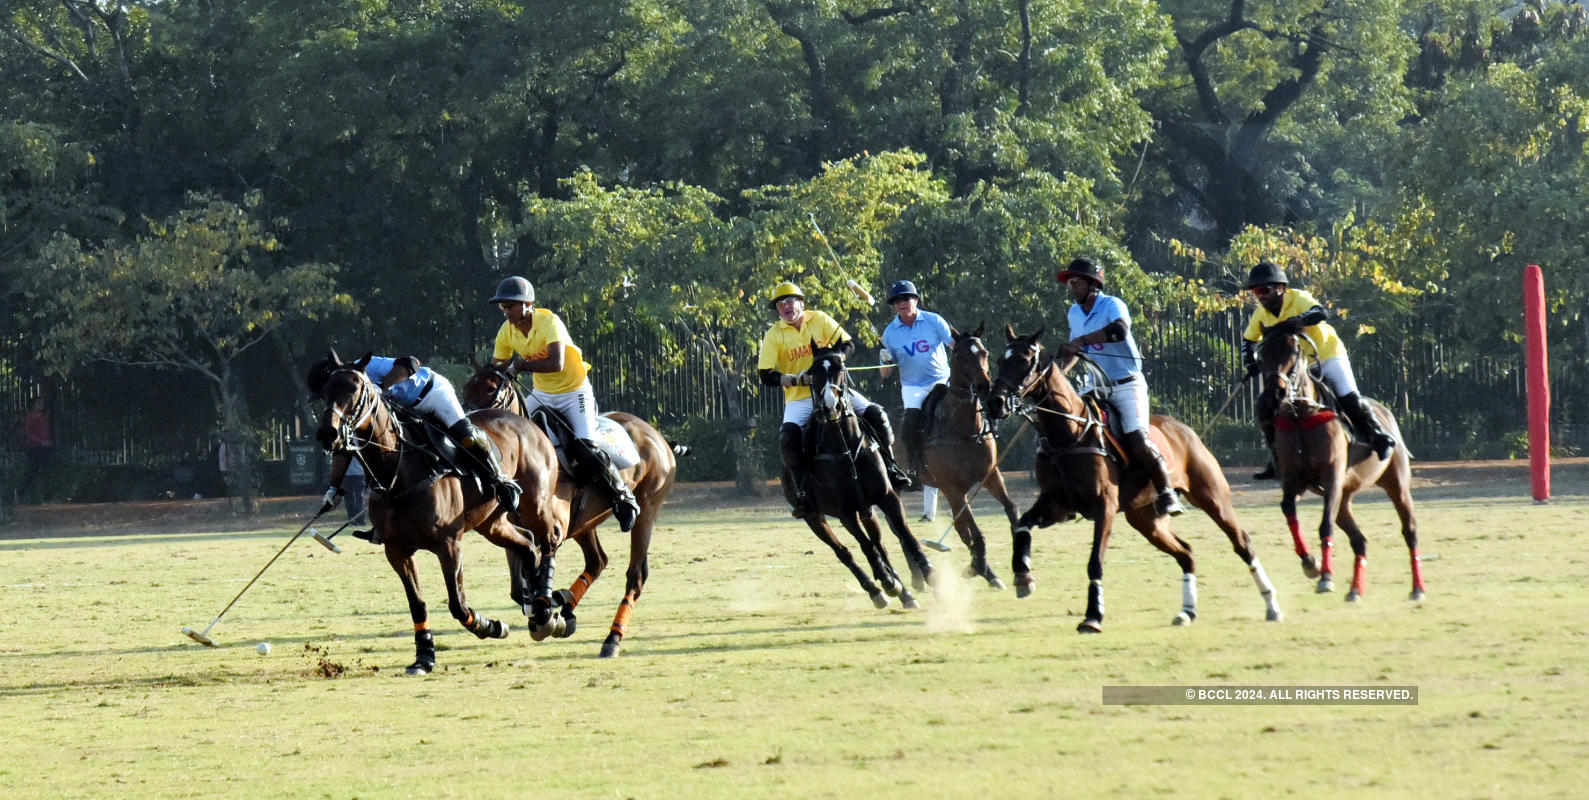 Who’s who of Jaipur attend polo match